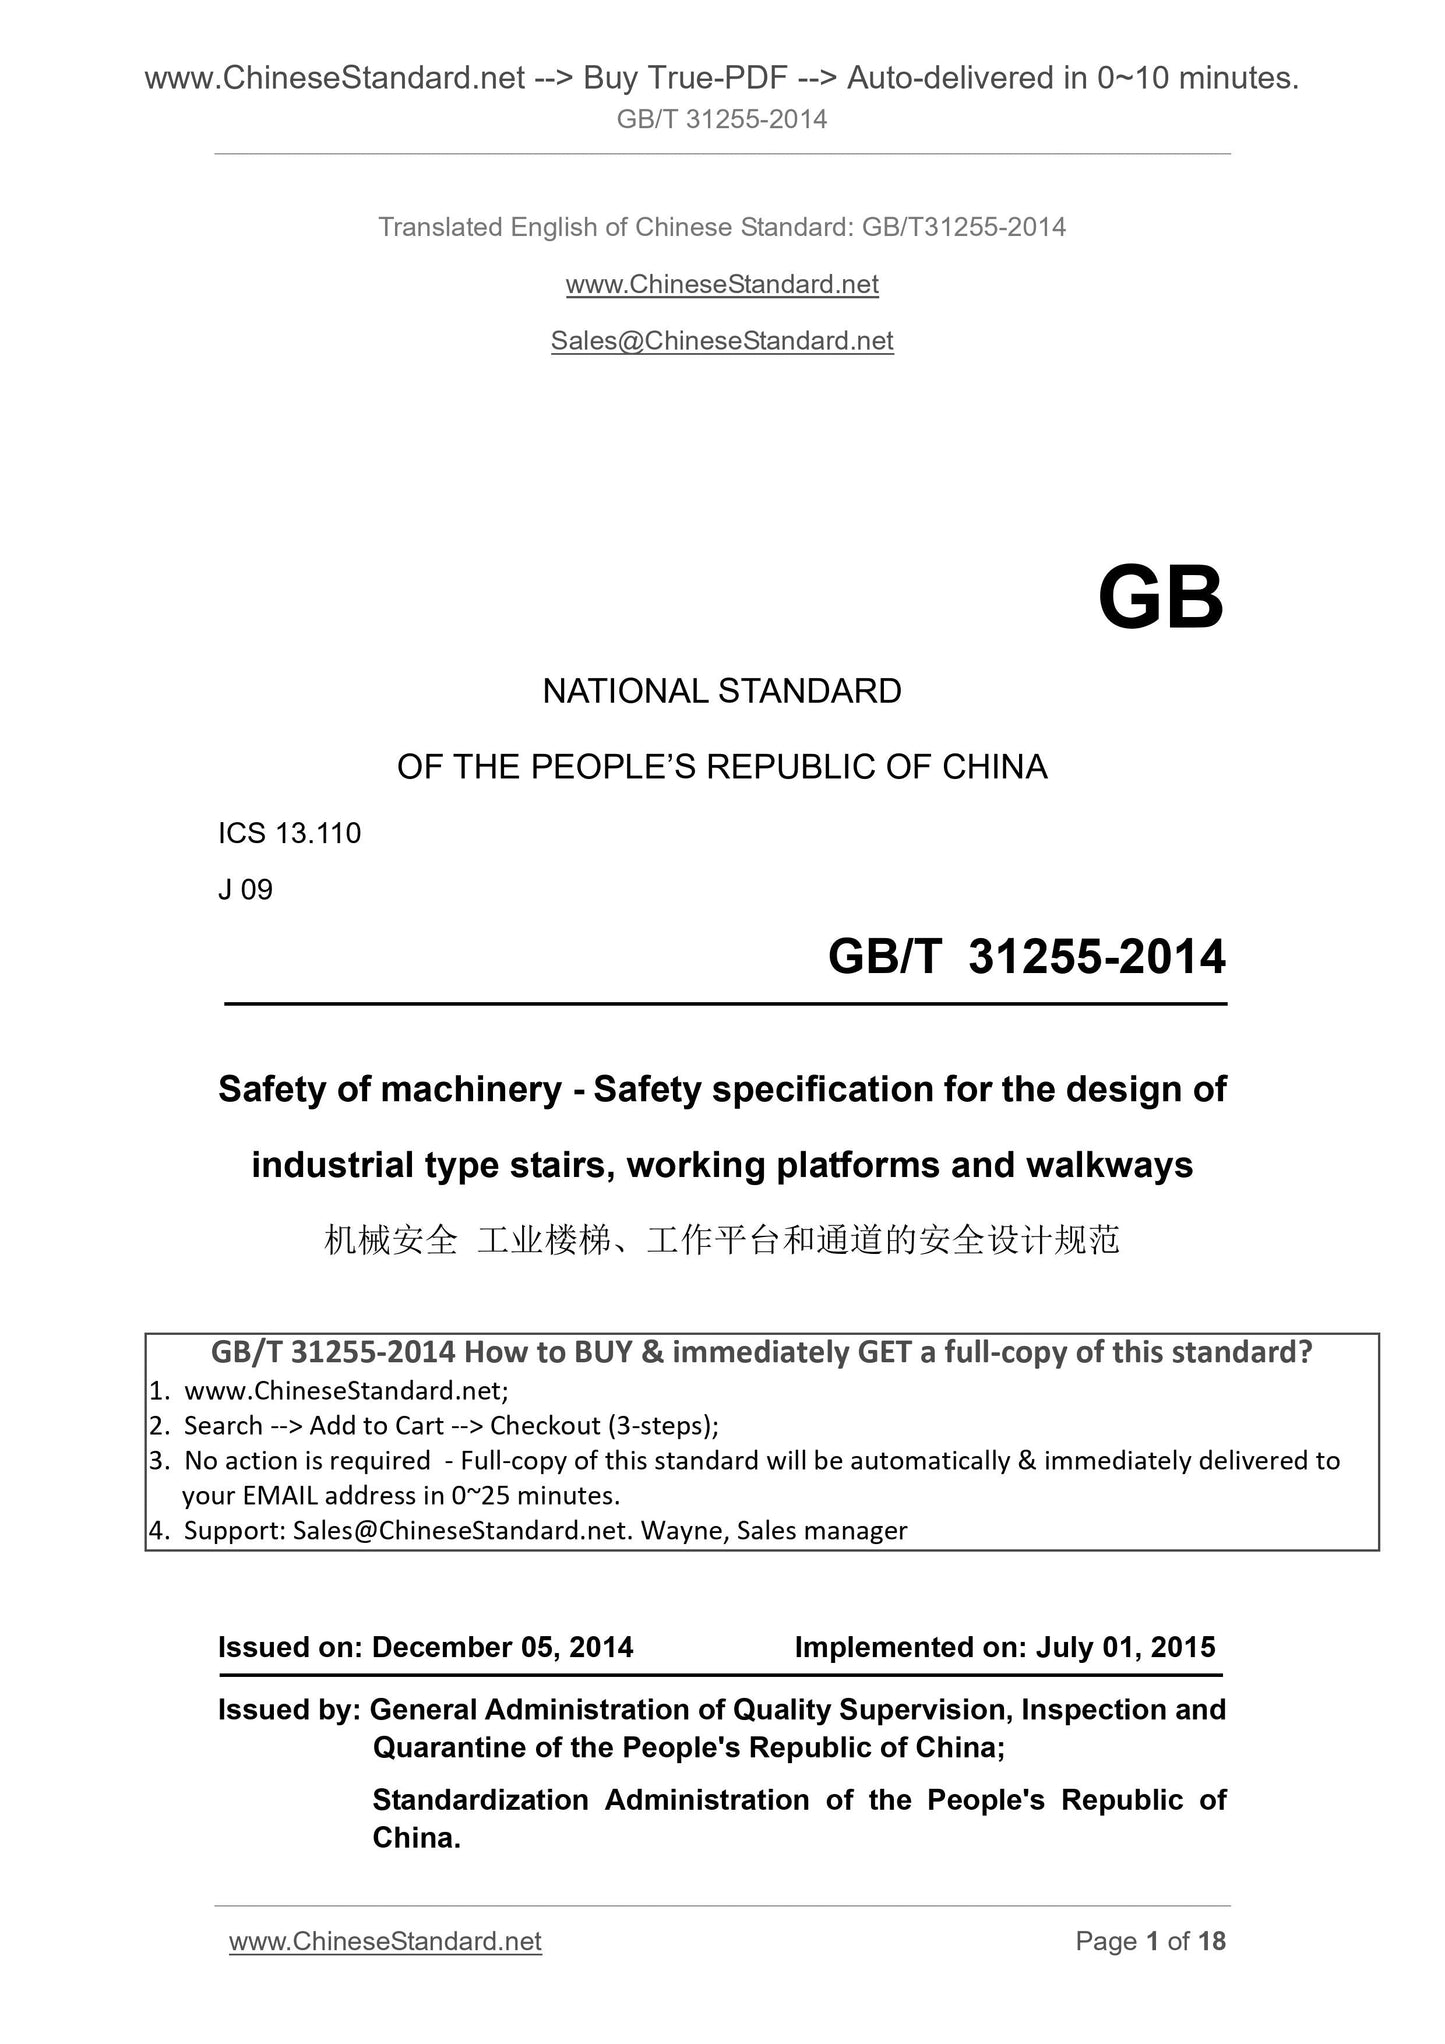 GB/T 31255-2014 Page 1